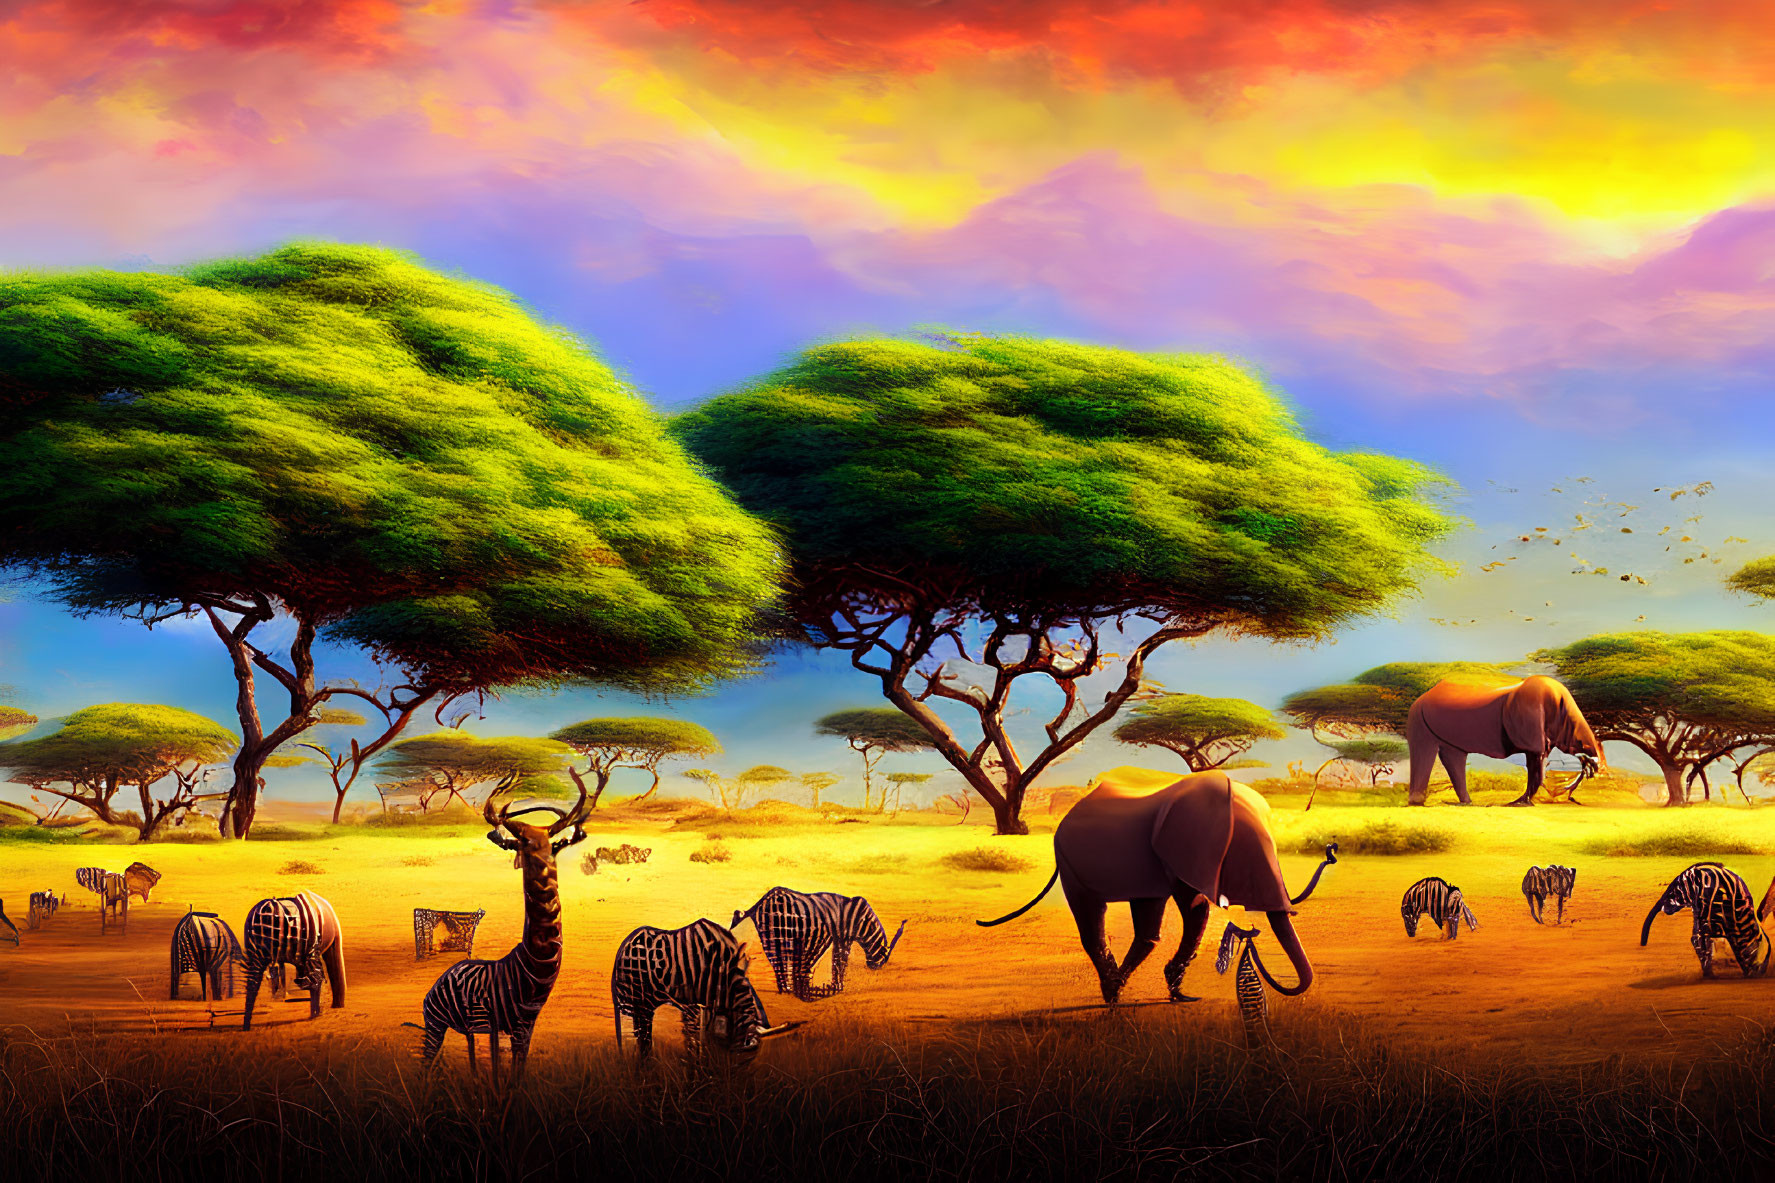 African Savanna Sunset Painting with Elephants, Zebras, and Acacia Trees